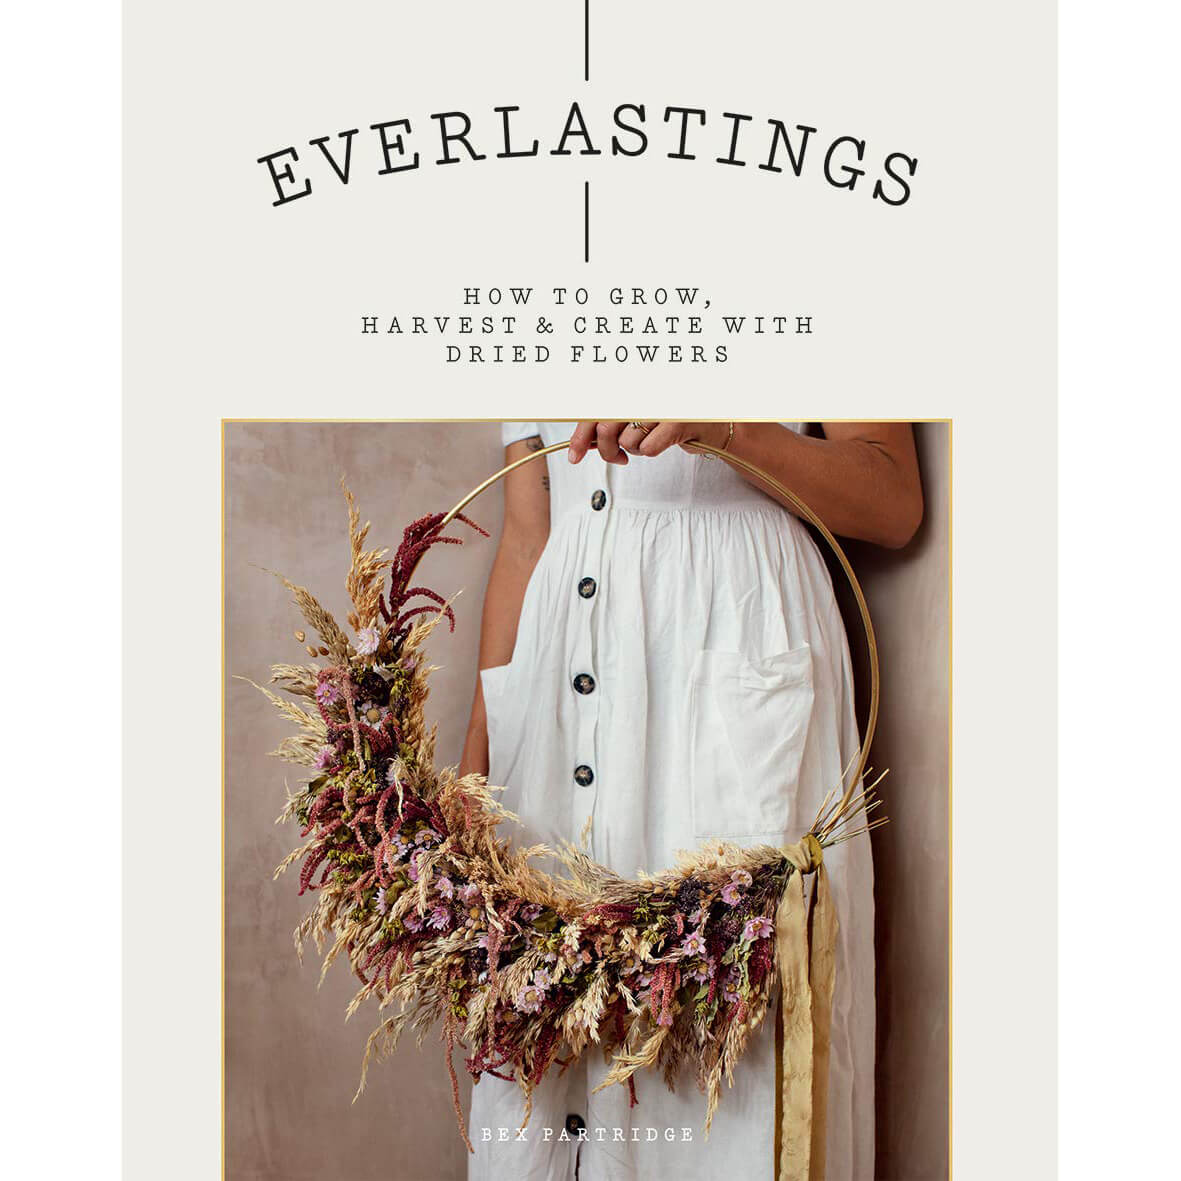 Everlastings: How To Grow, Harvest And Create With Dried Flowers front cover.